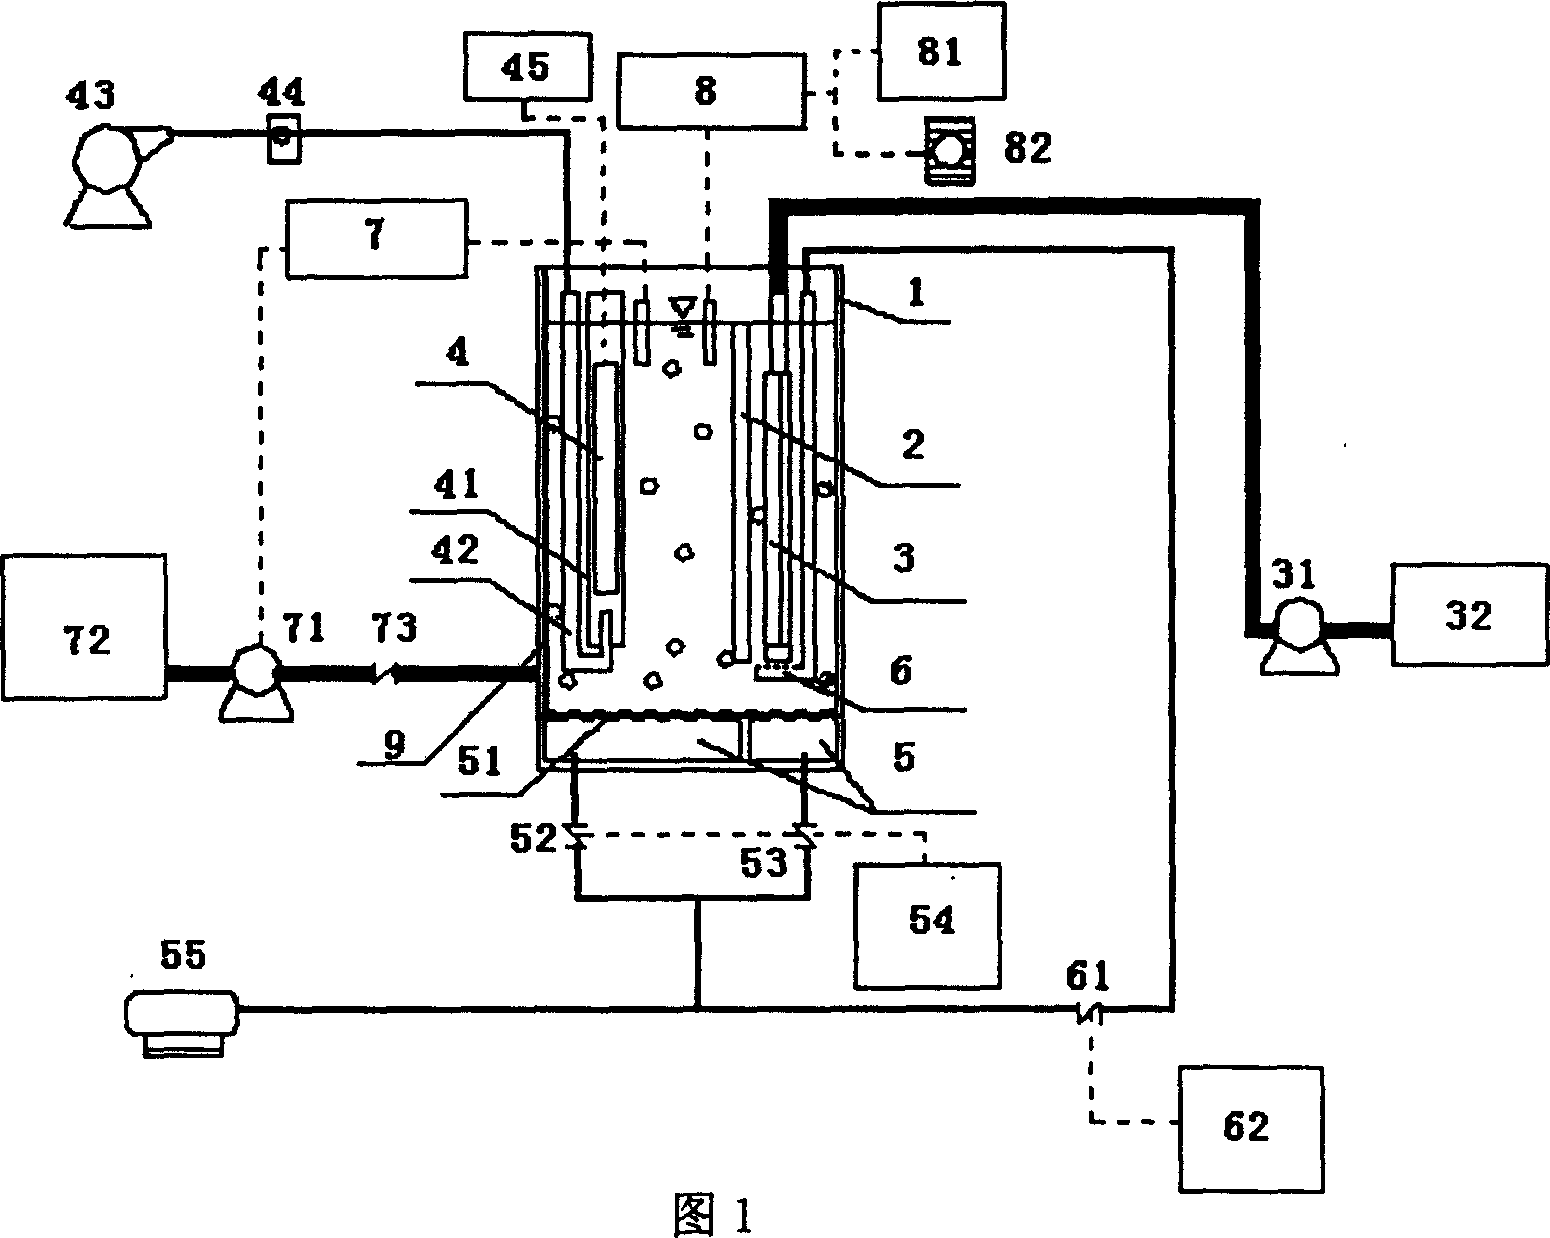 Equipment for treating with water by using suspension photocatalysis and oxidation